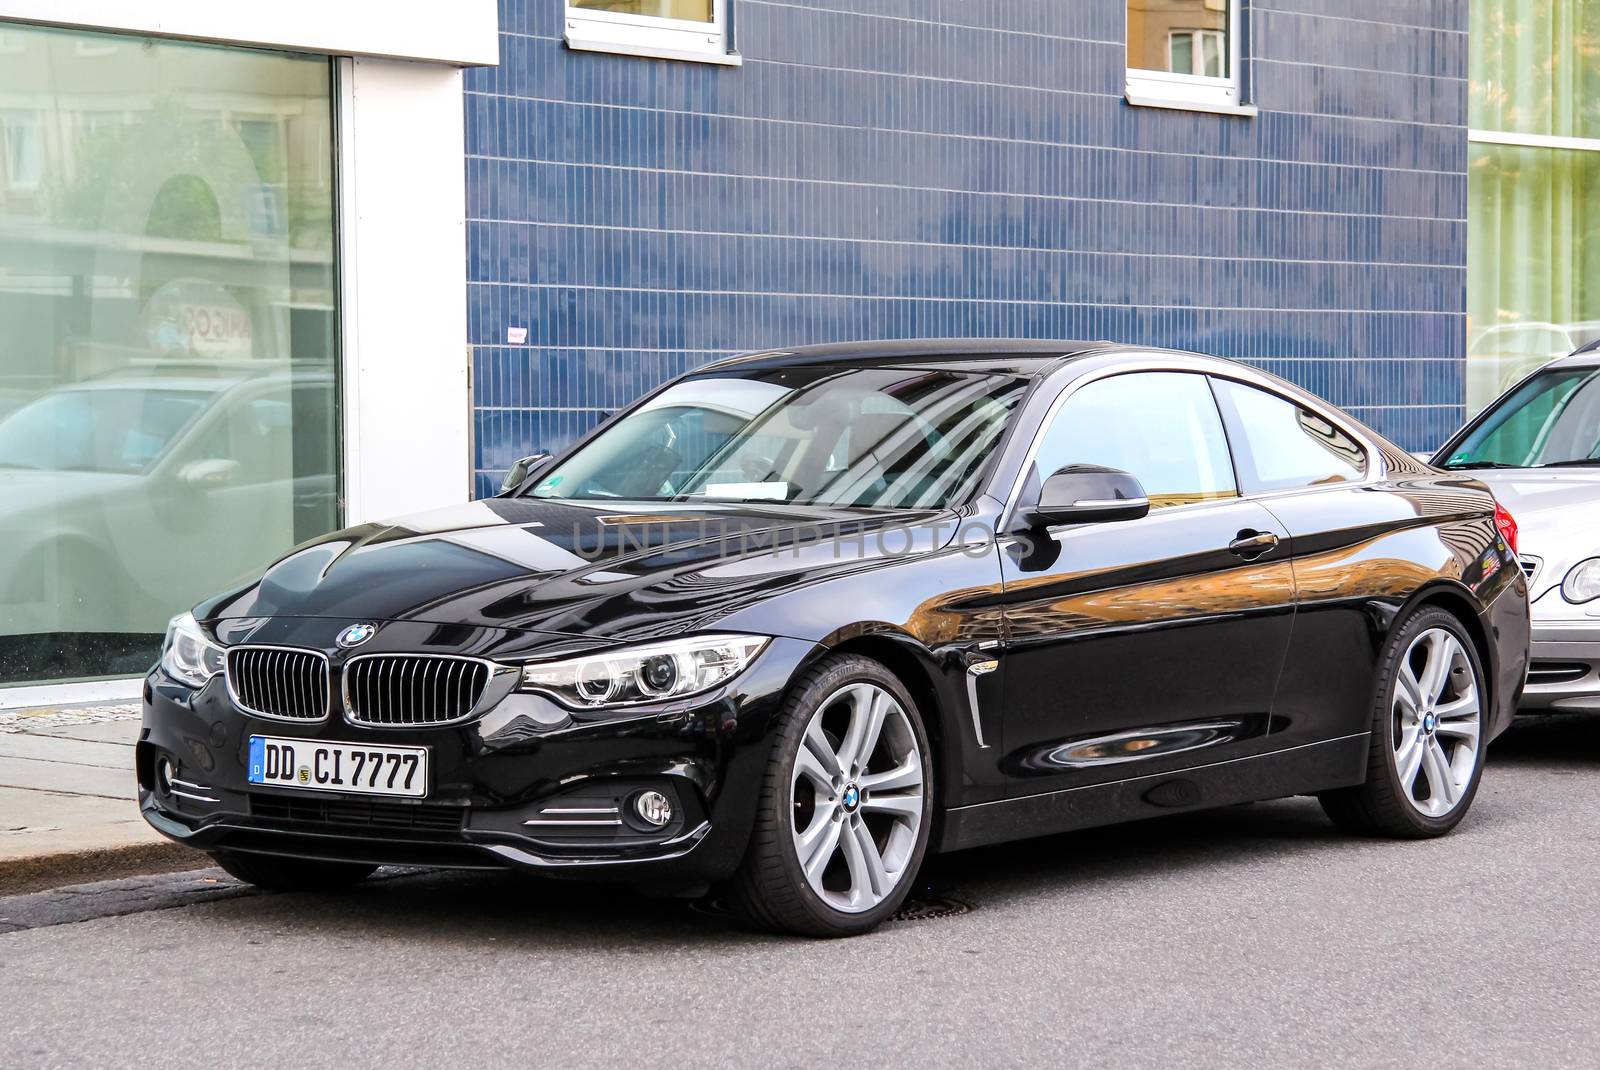 DRESDEN, GERMANY - JULY 20, 2014: Black sports car BMW F32 4-series at the city street.